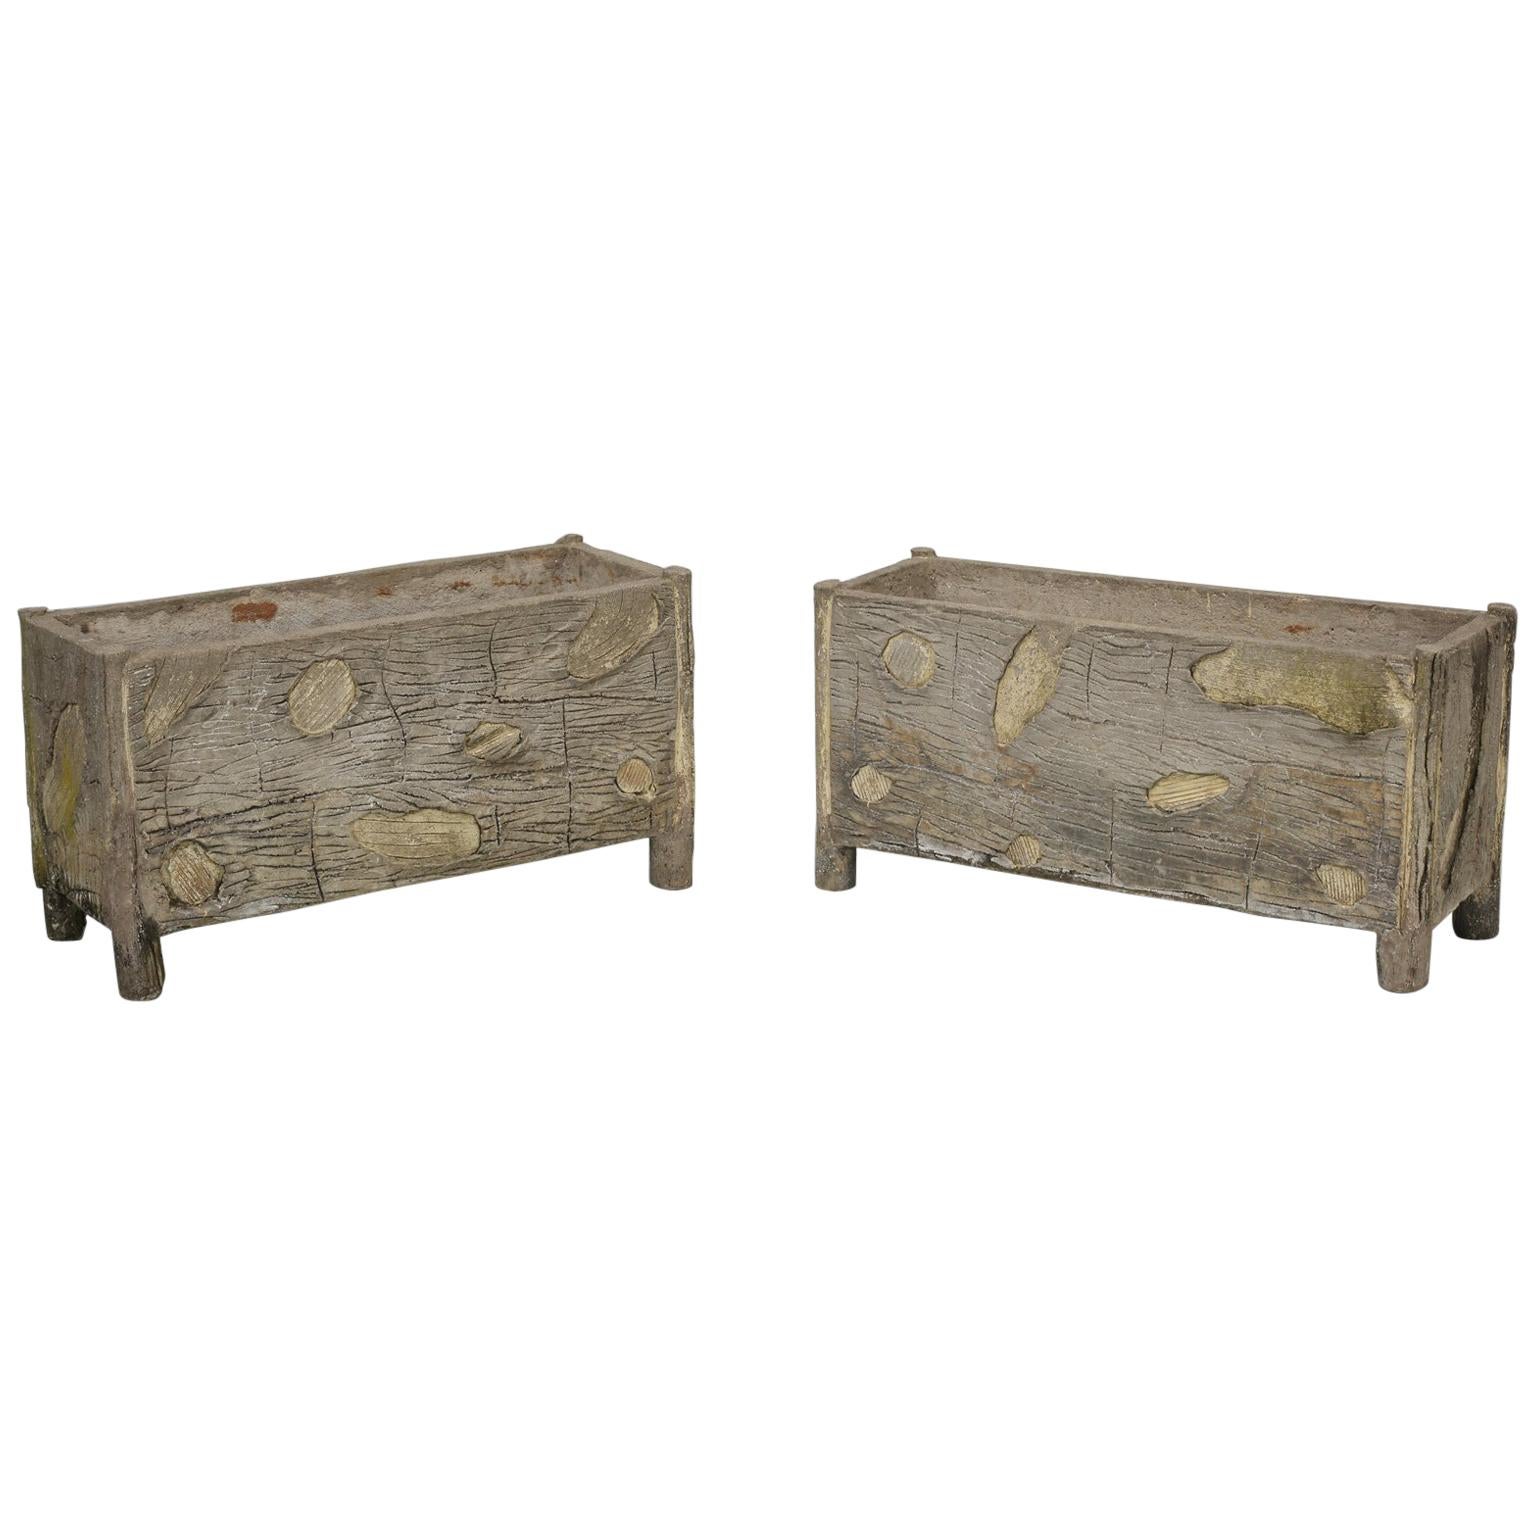 Rare Pair of Vintage French Garden Faux Bois Troughs or Planters